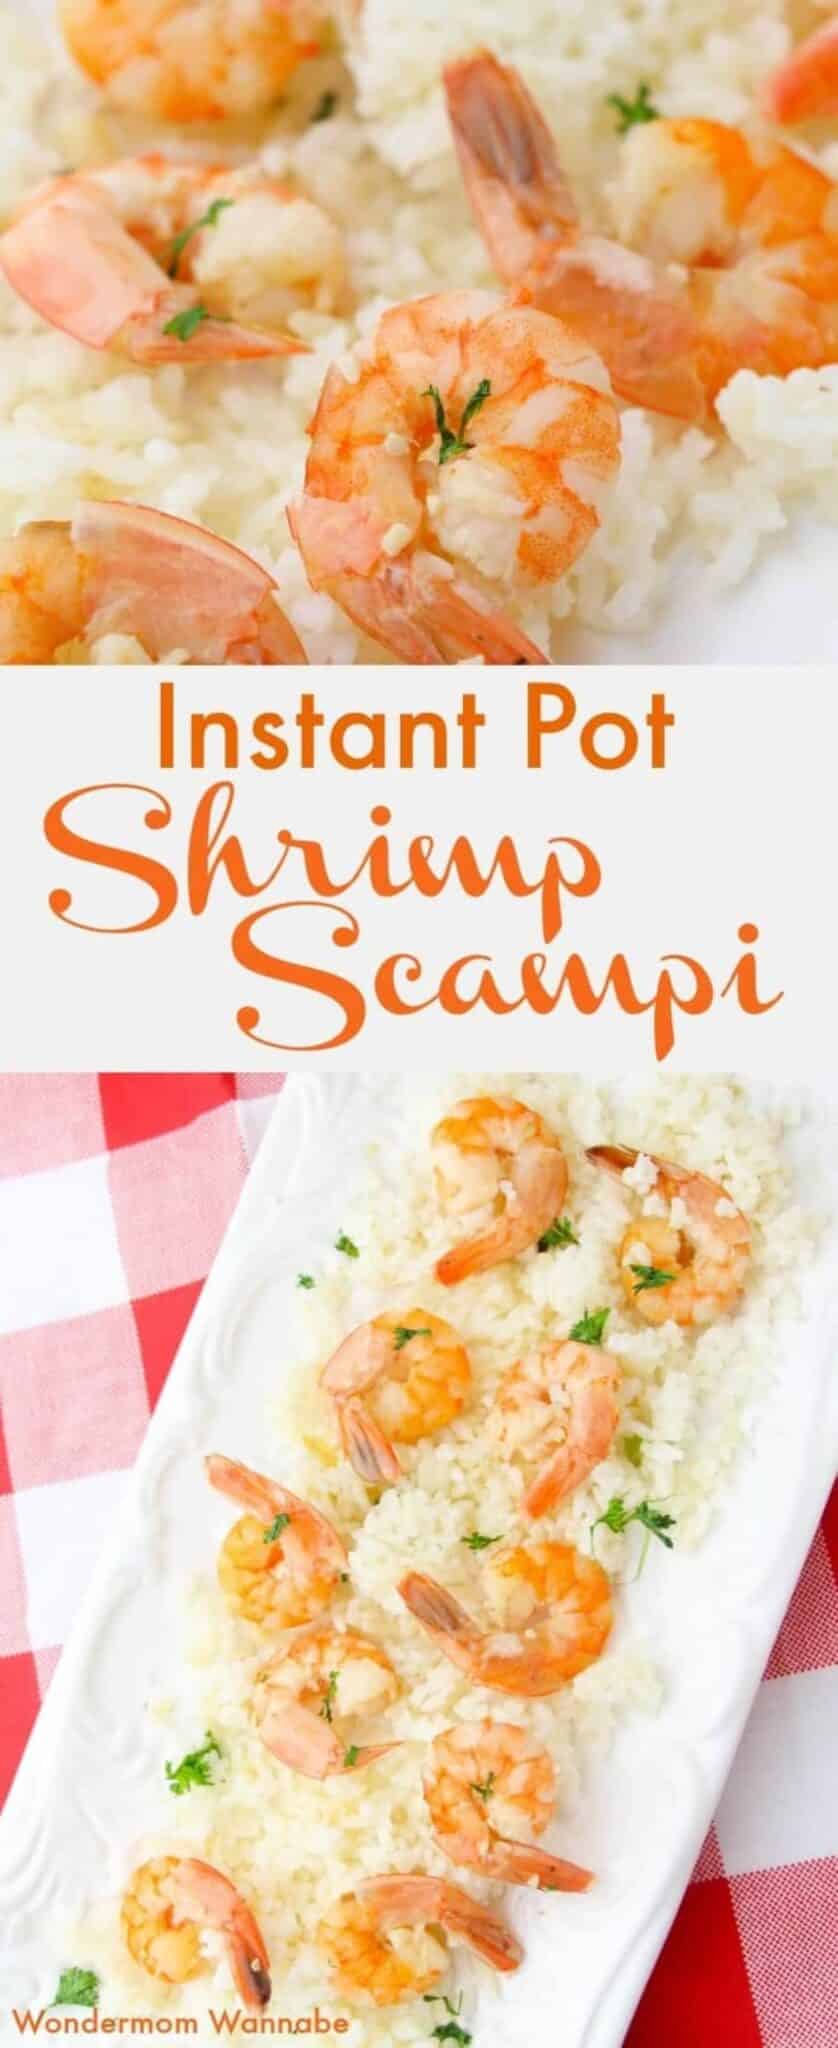 A collage of shrimp scampi with rice on a white plate on a red and white checkered cloth with title text reading Instant Pot Shrimp Scampi.